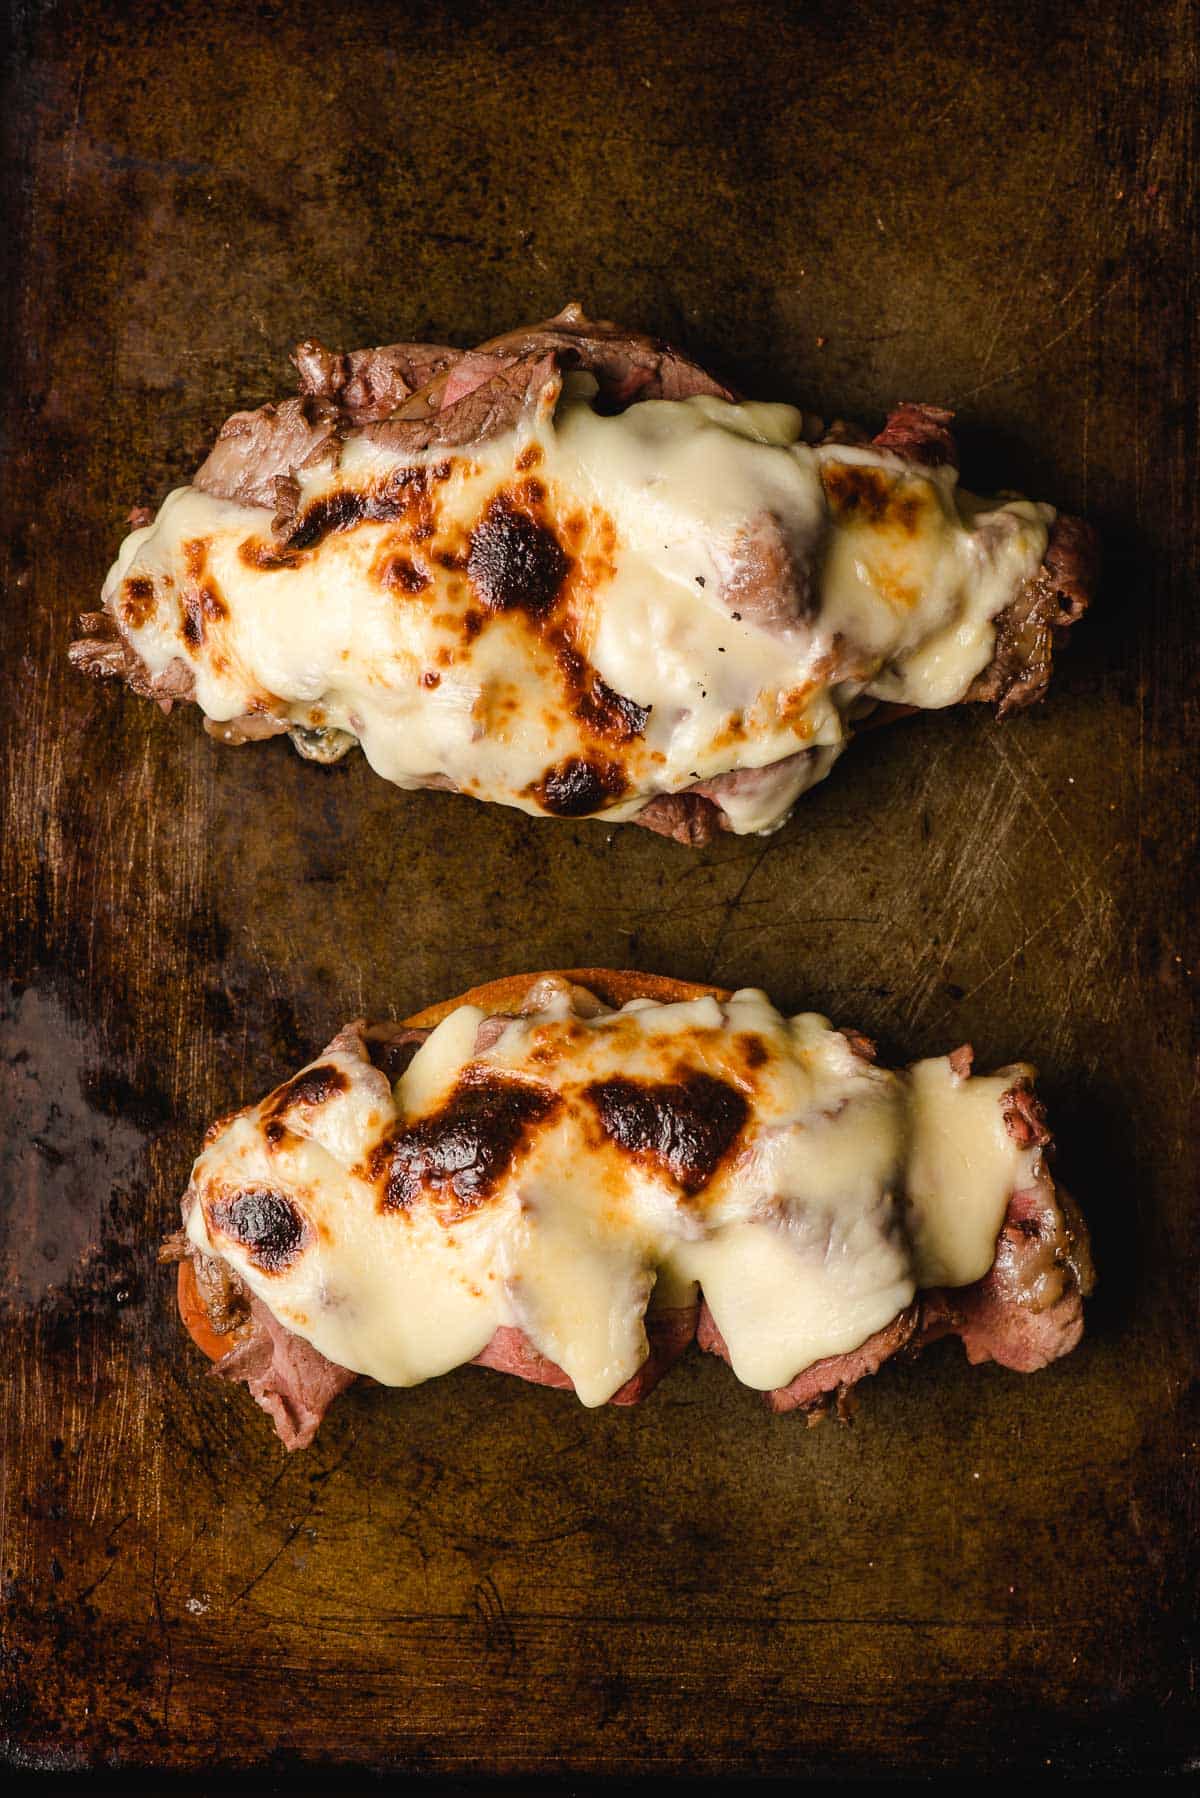 American cheese warmed on top of prime rib and garlic bread.